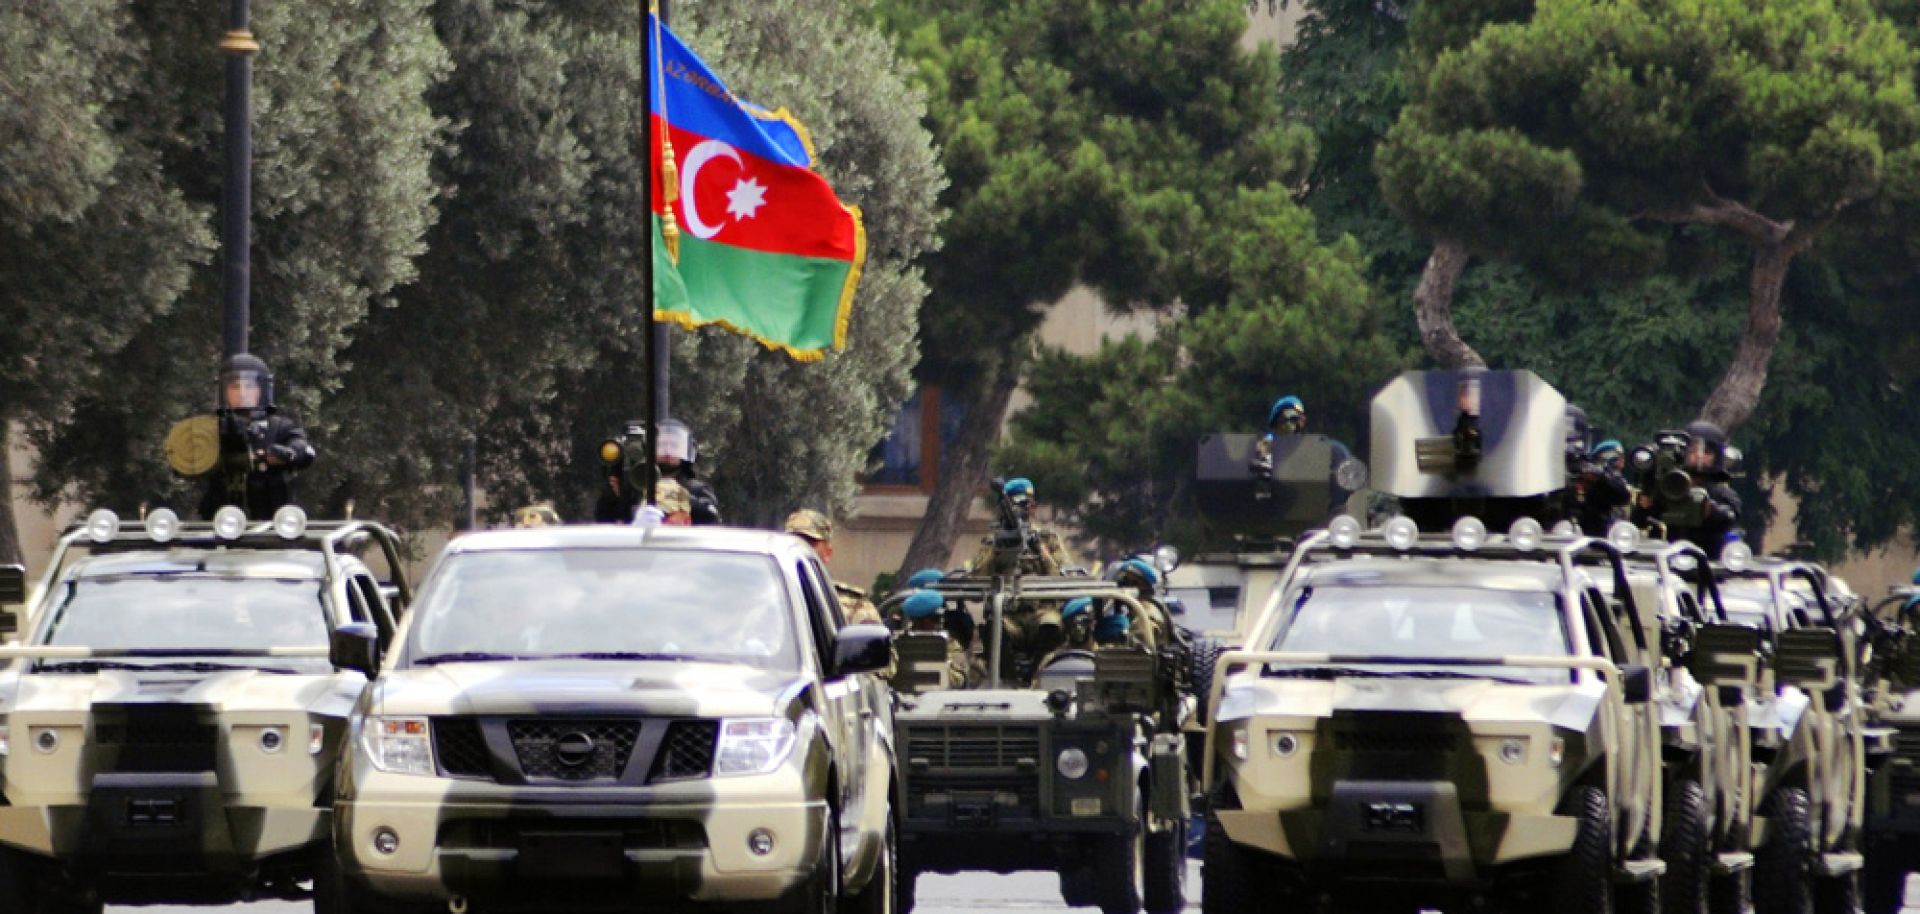 Military vehicles participate in a parade in Baku on June 26, 2013.